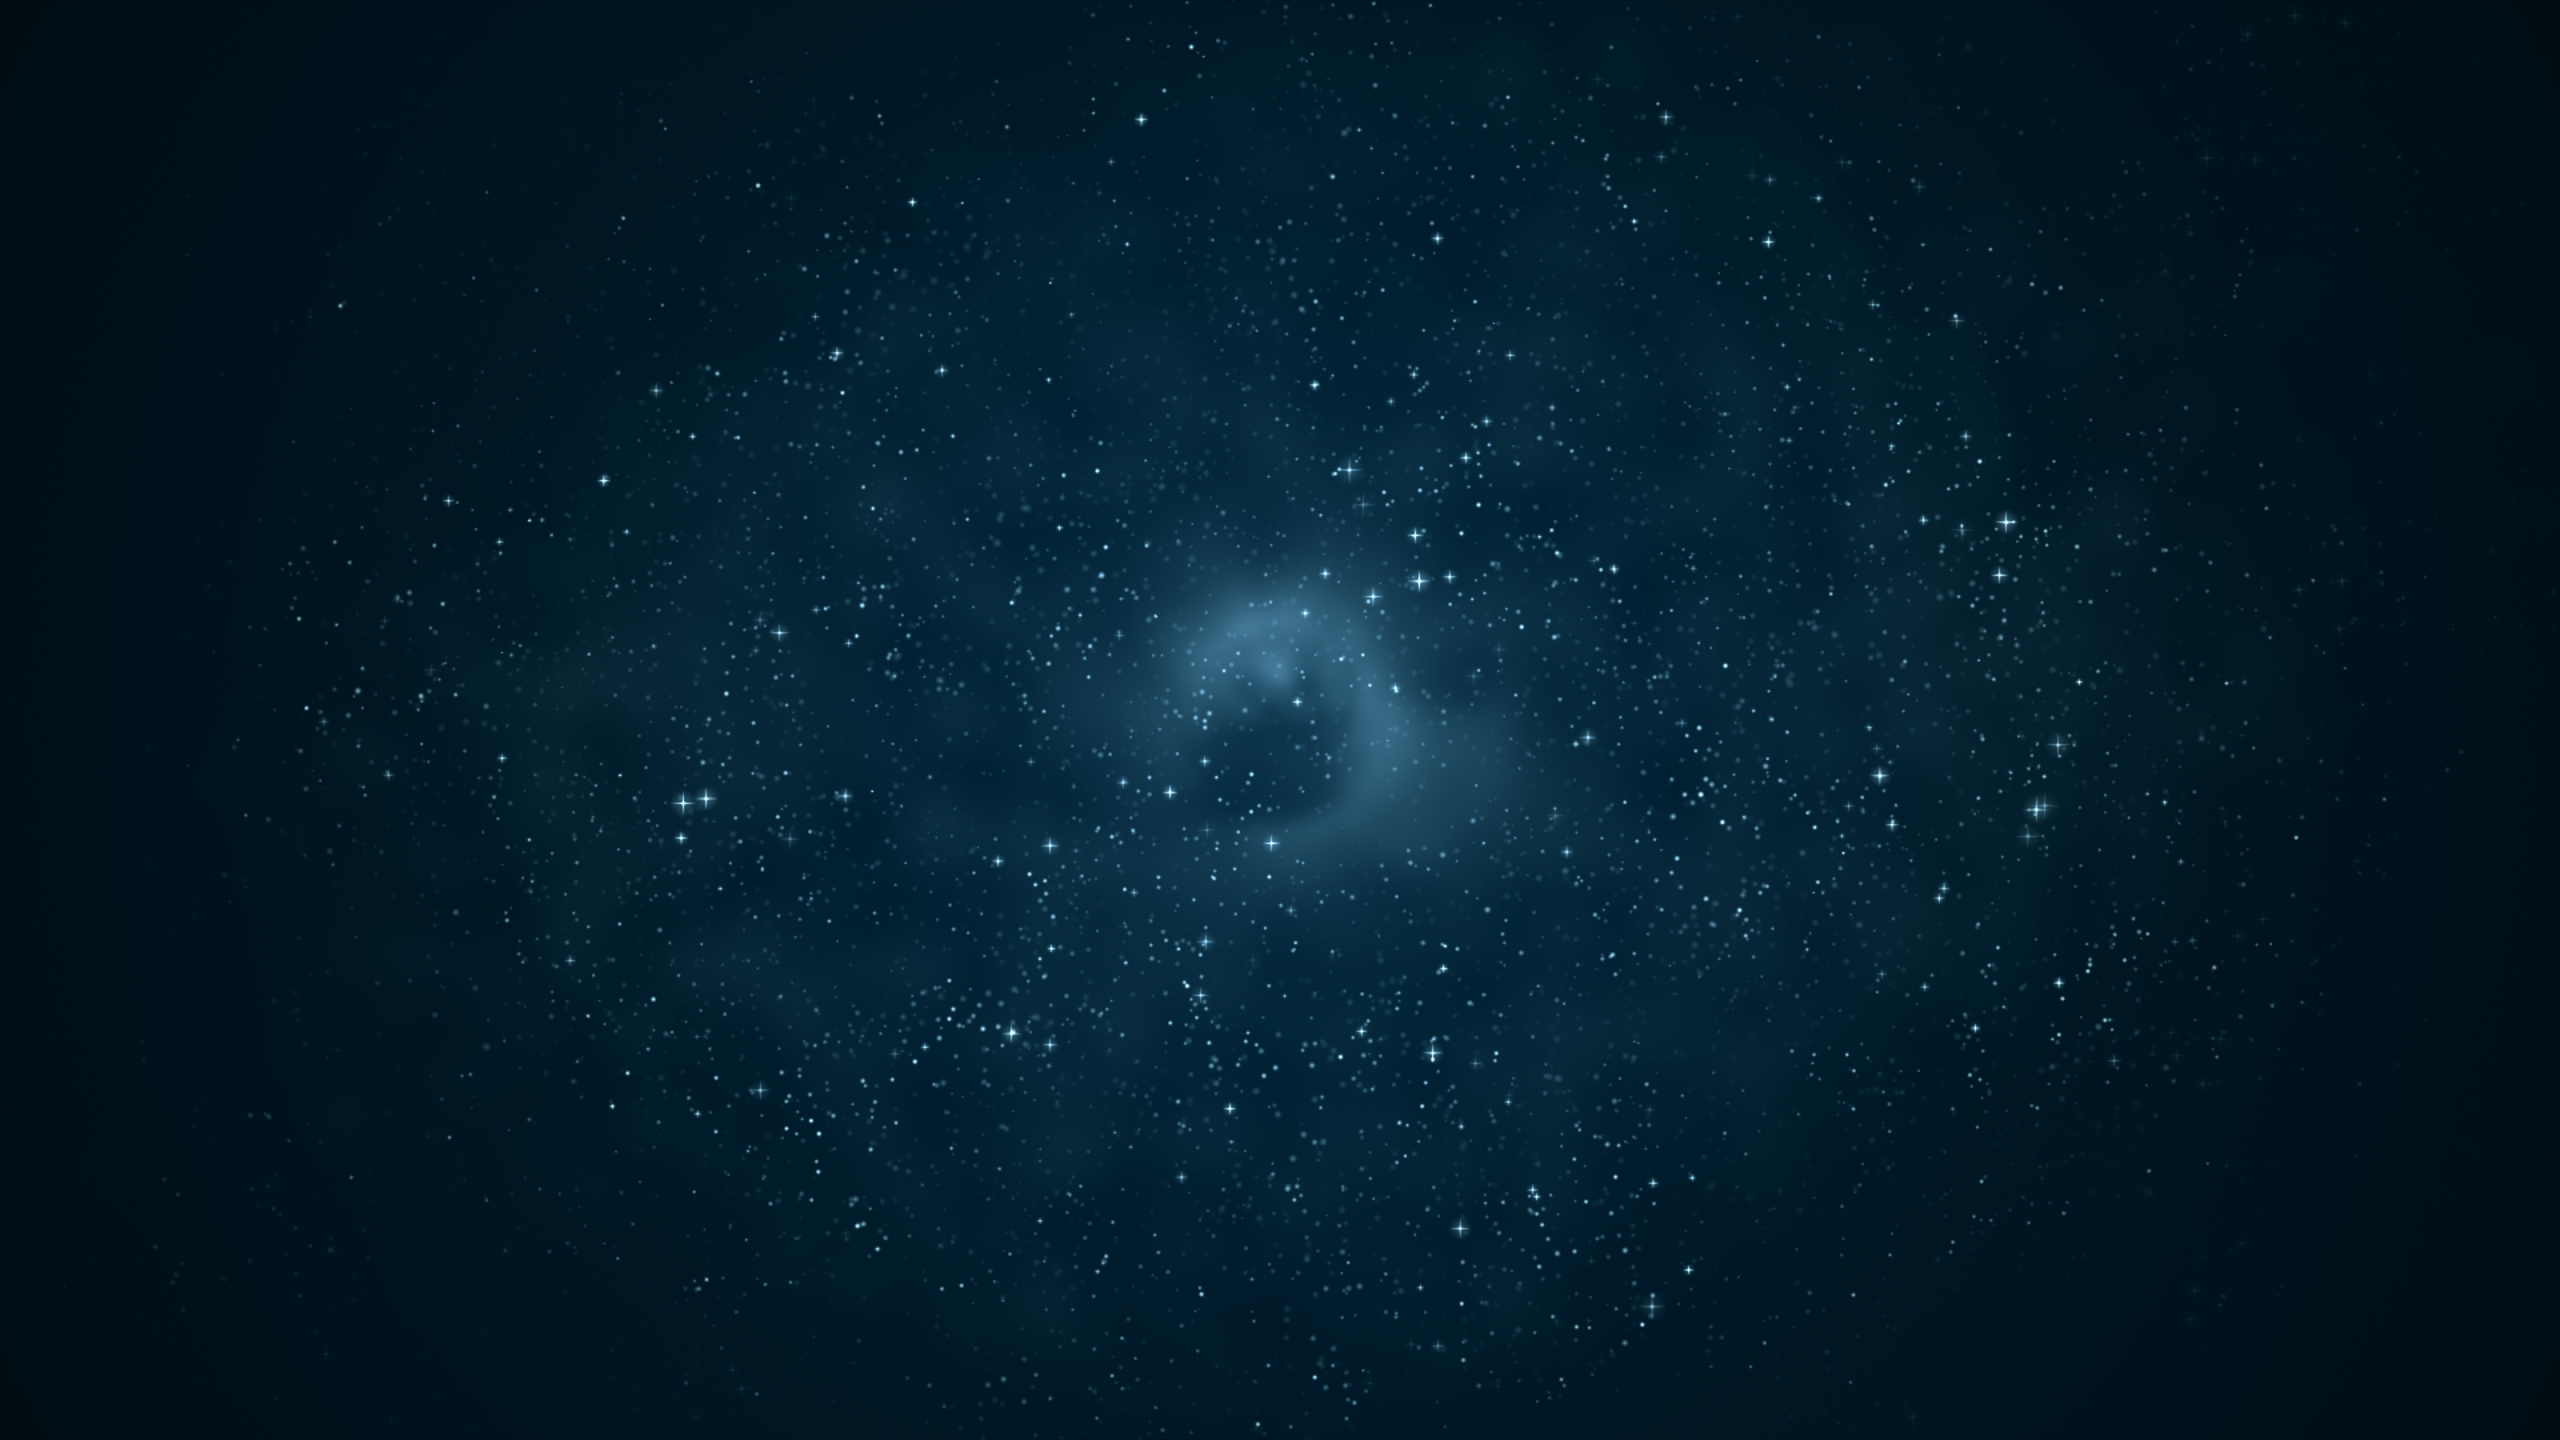 Starry Night Sky Over The Starry Night. Wallpaper in 2560x1440 Resolution